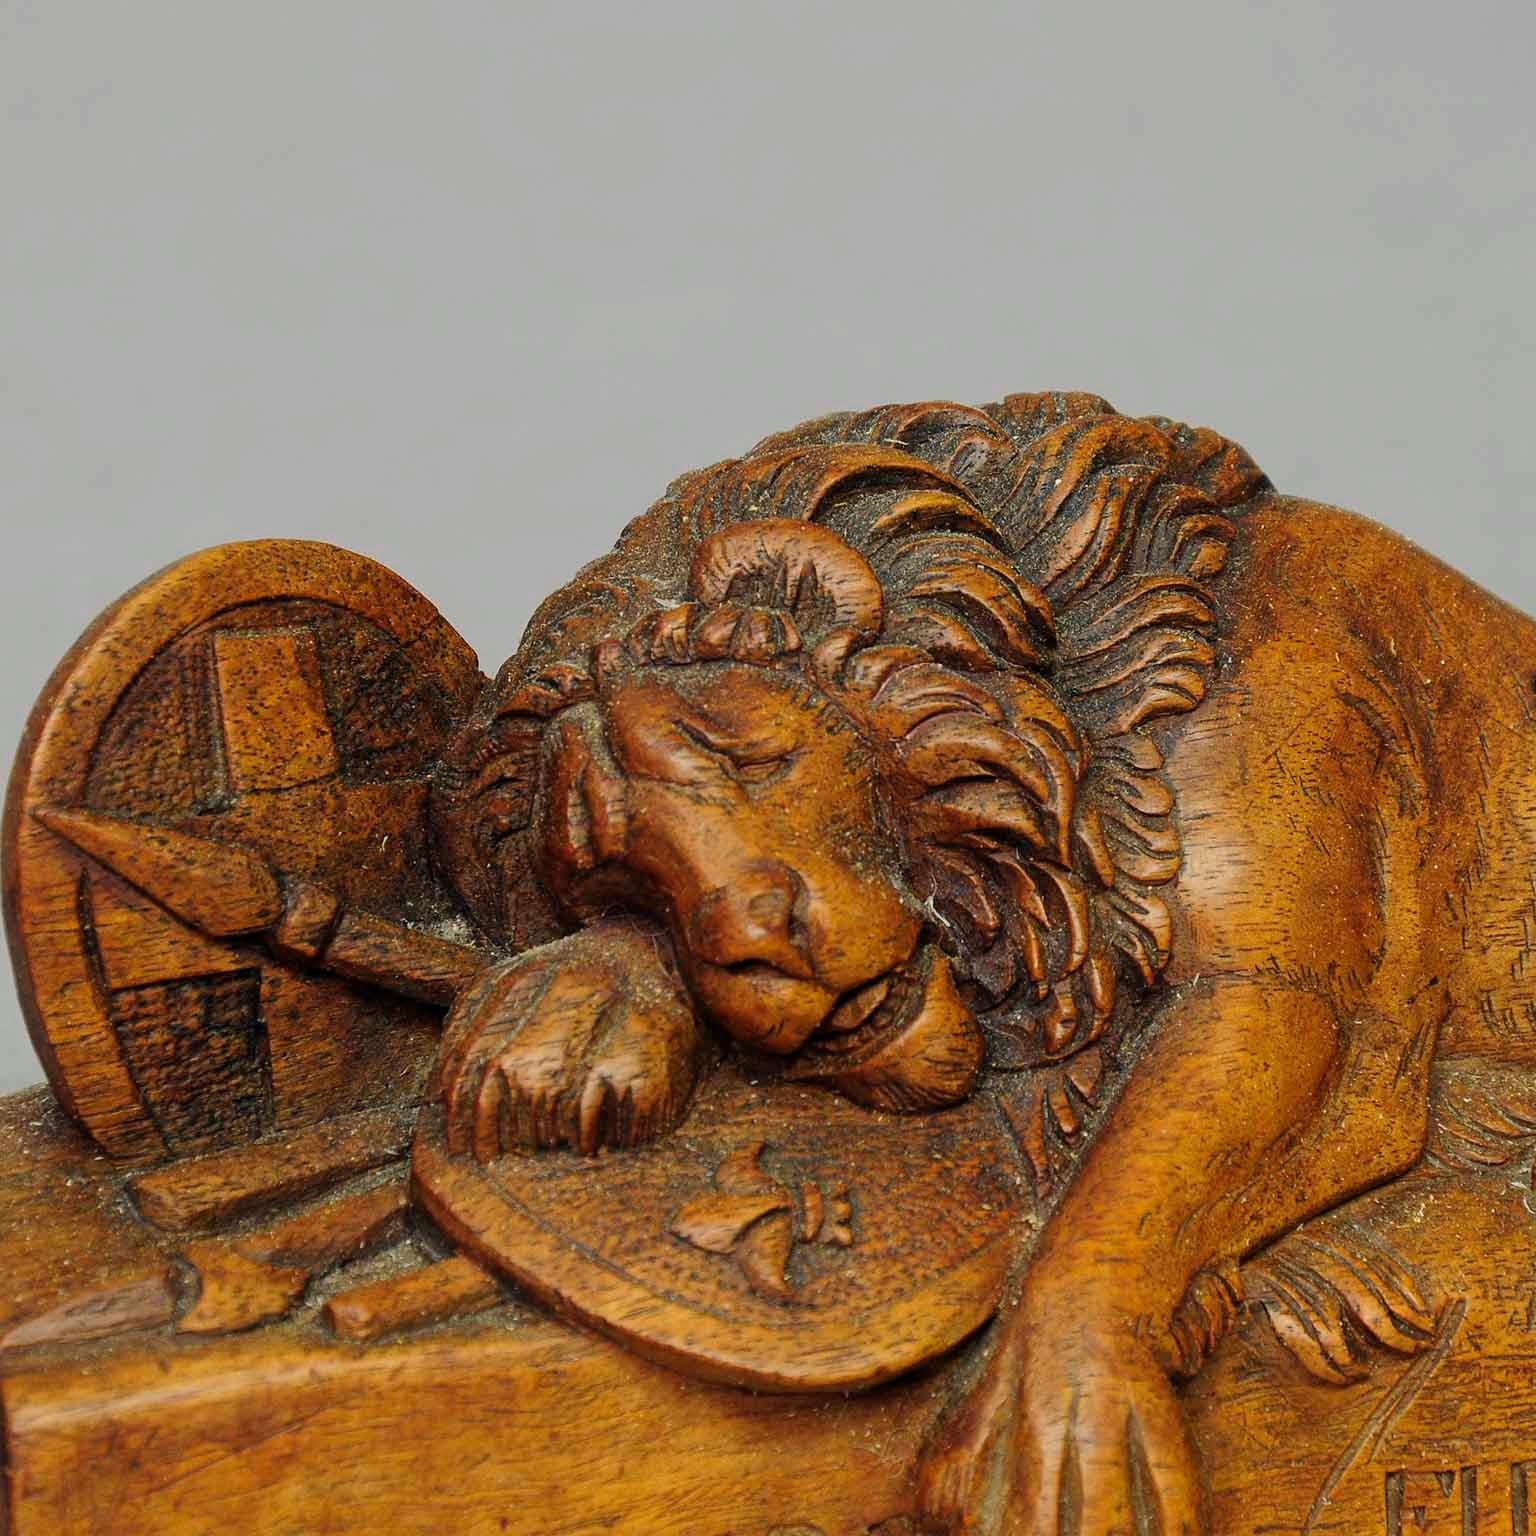 An old Swiss woodcarving of the famous lion of Lucern. Brienz, Black Forest circa 1900

Measures: width: 9.84